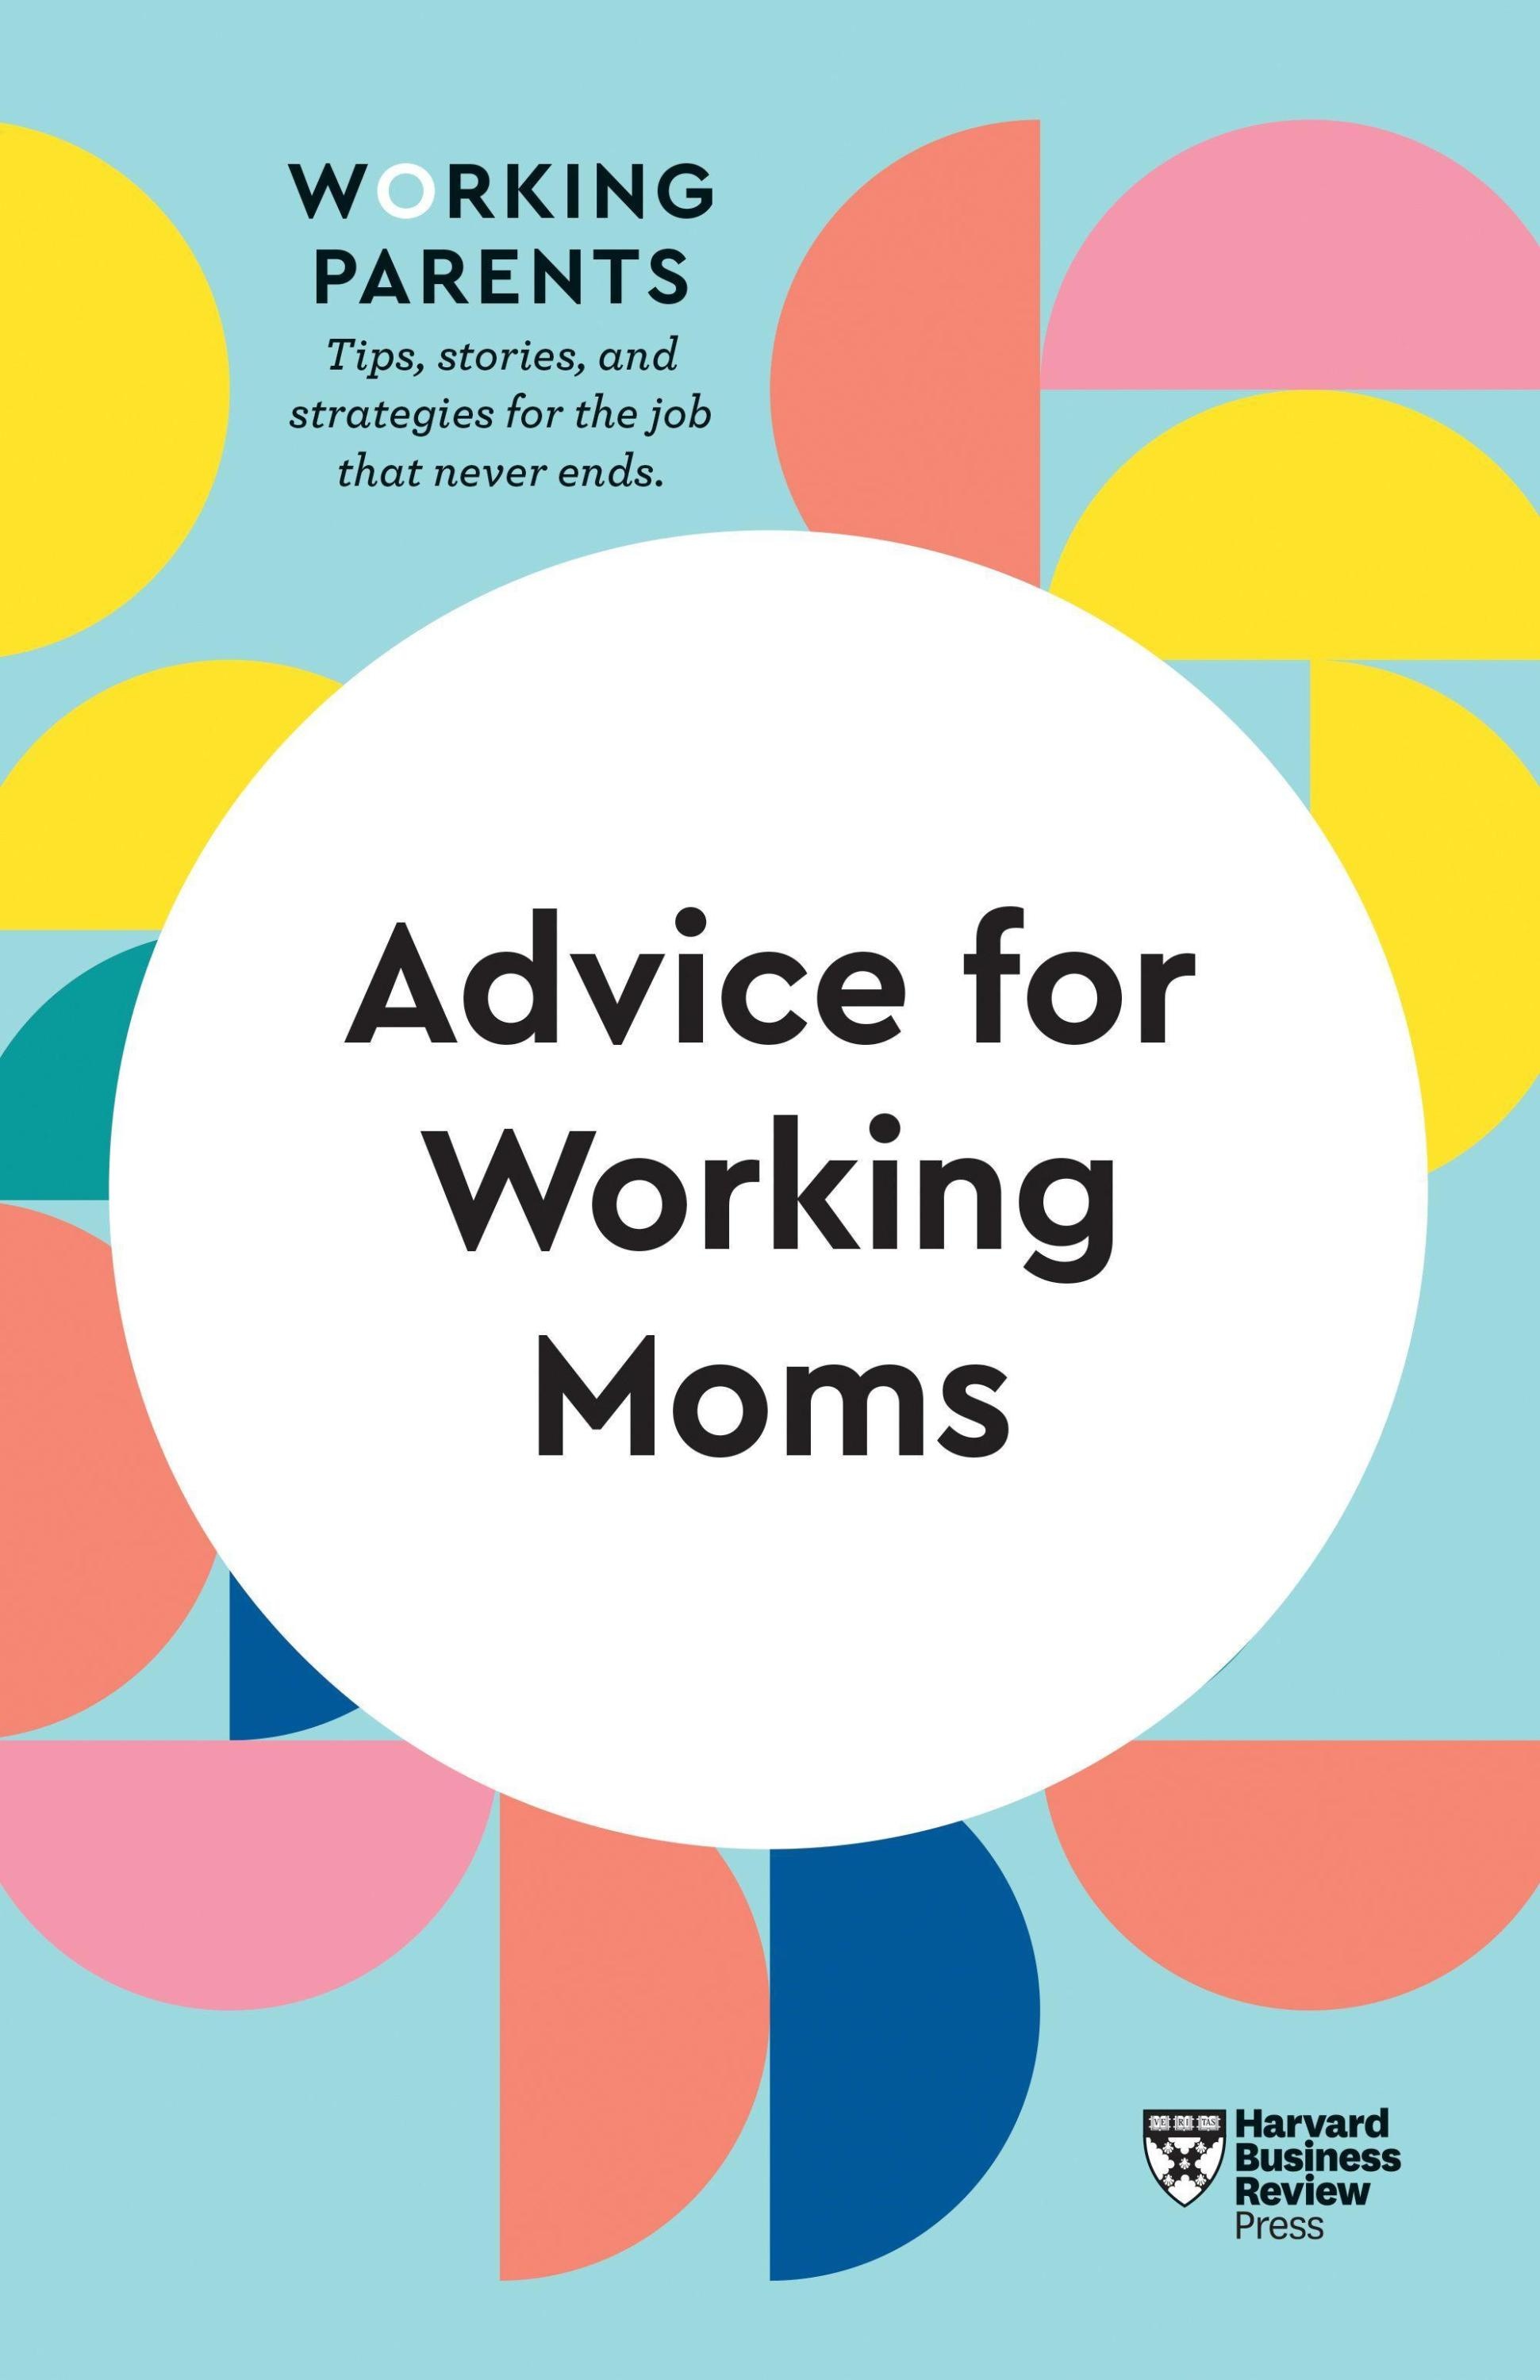 Hbr Working Parents Series / Advice For Working Moms (Hbr Working Parents Series) - Harvard Business Review  Daisy Dowling  Sheryl G. Ziegler  Frances